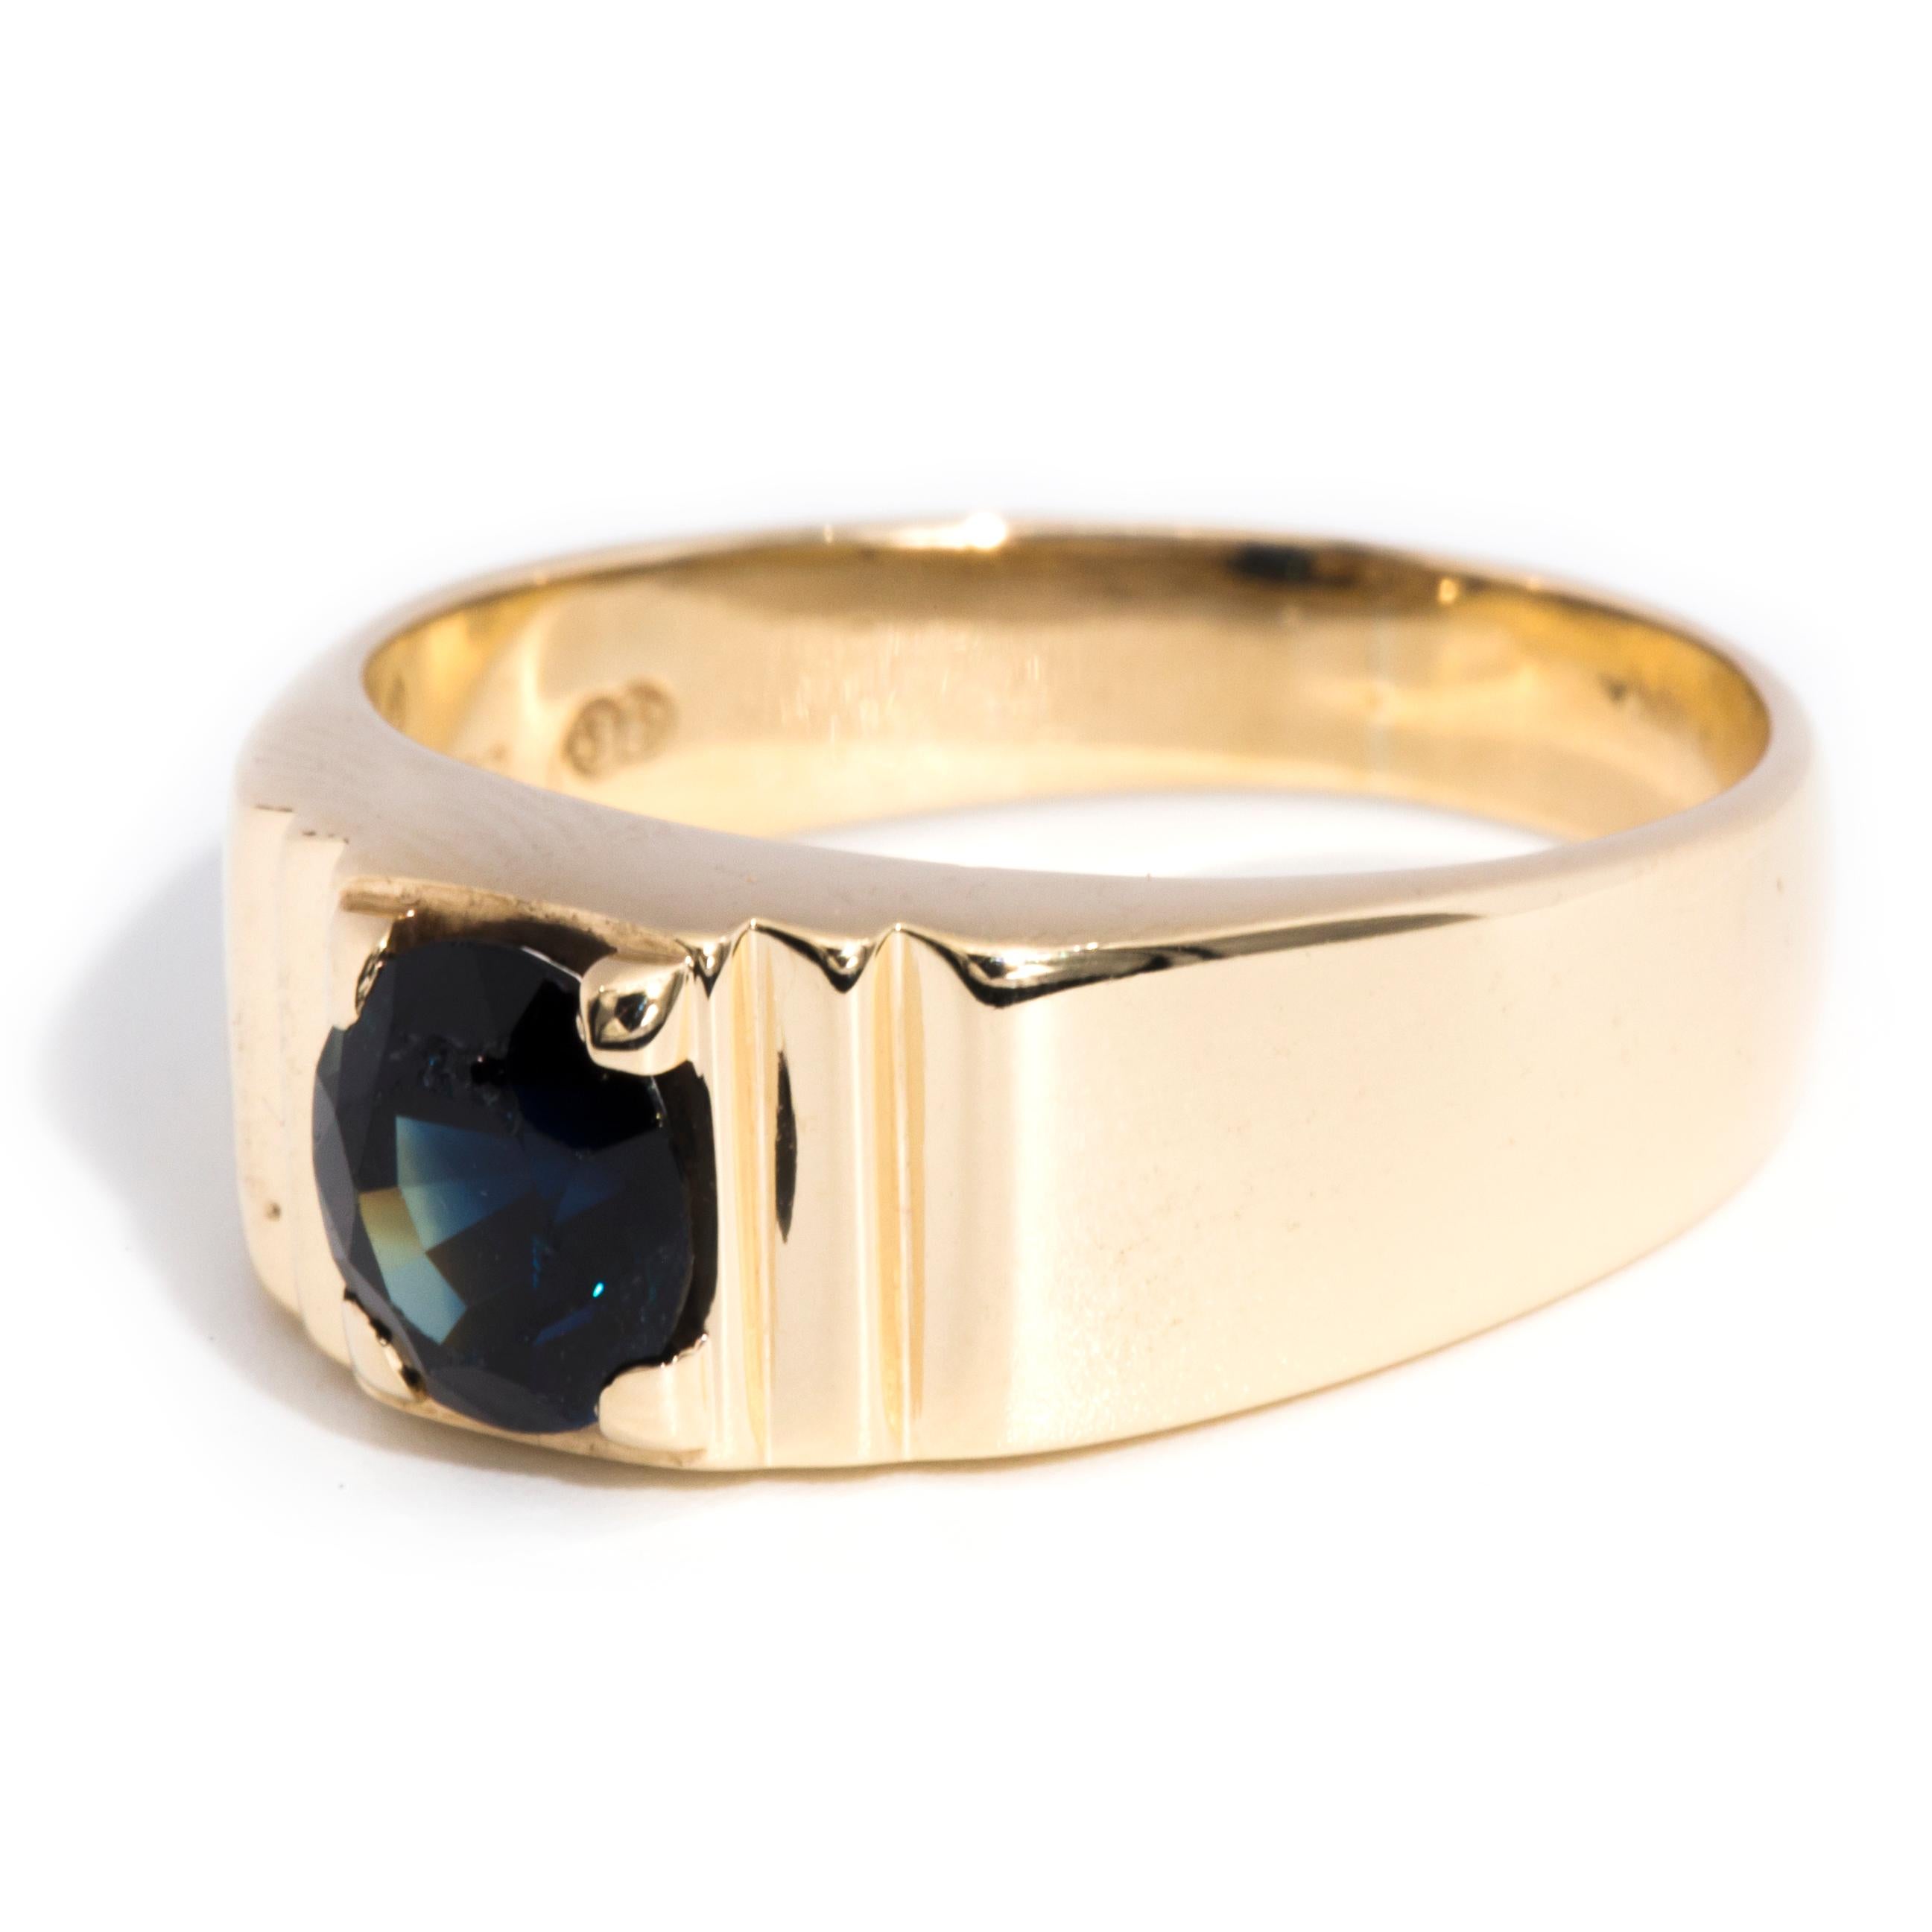 1.33 Carat Oval Faceted Deep Blue Sapphire Vintage Mens 9 Carat Yellow Gold Ring 2